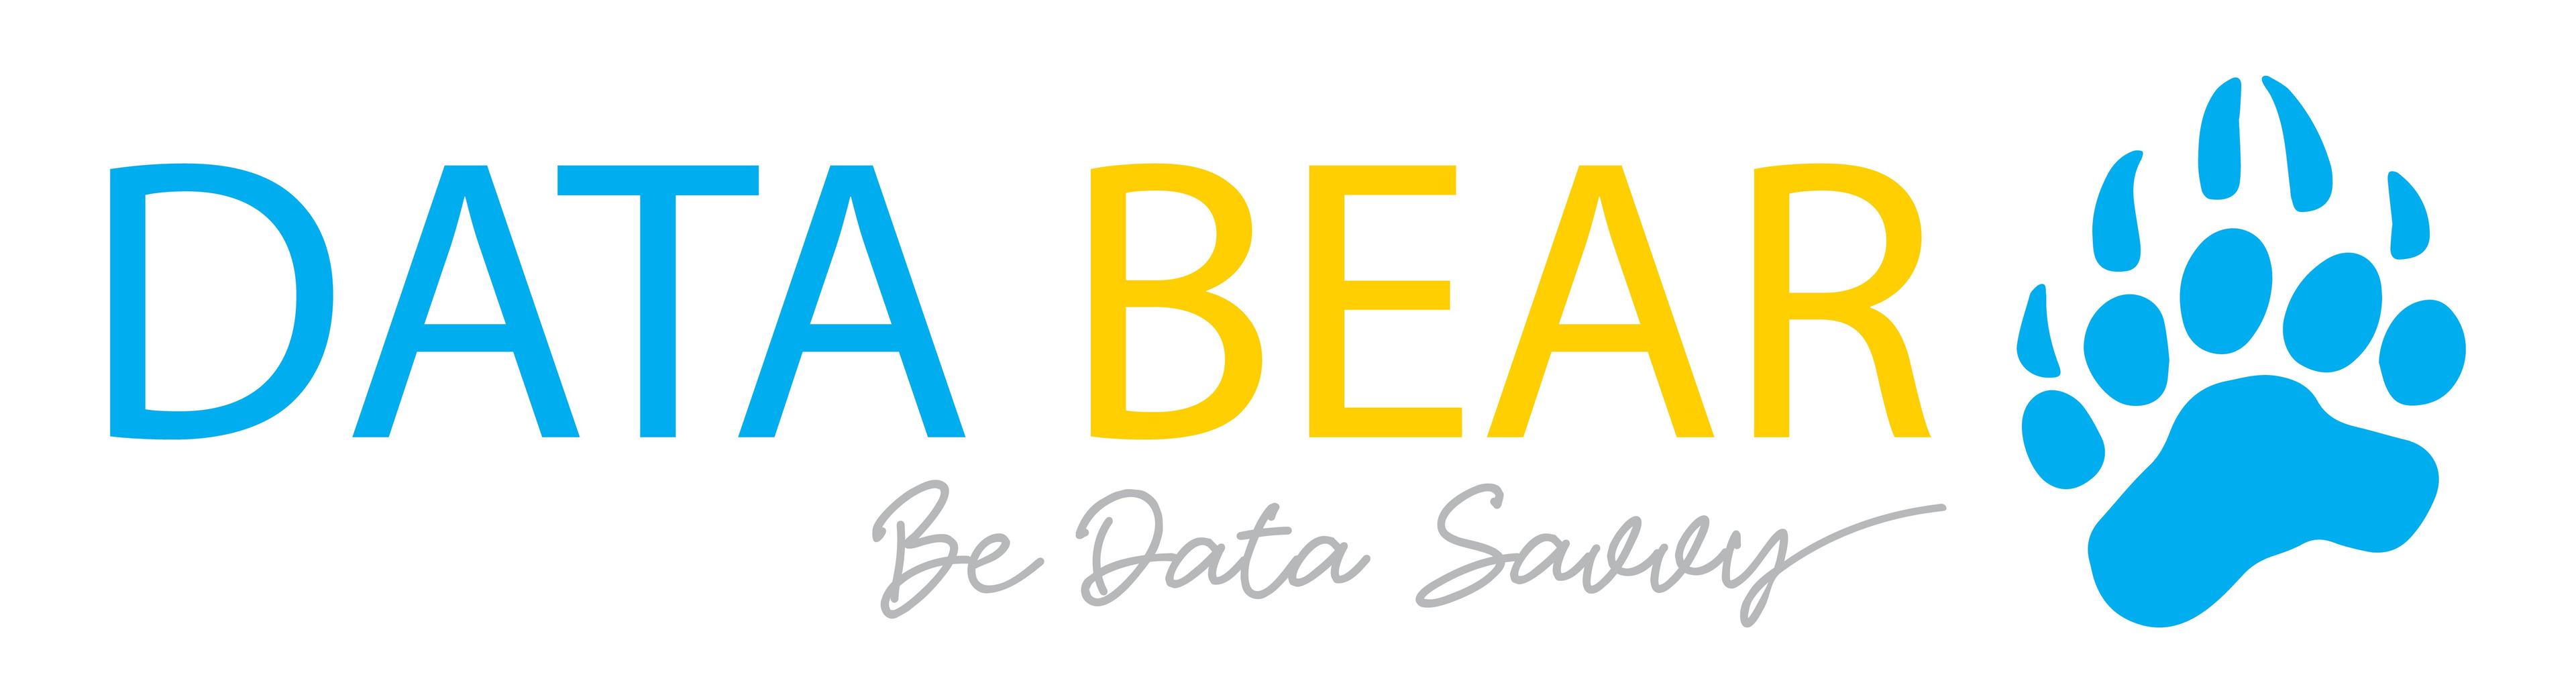 Product Sales What-if Analysis - Data Bear - Power BI Training and Consulting image